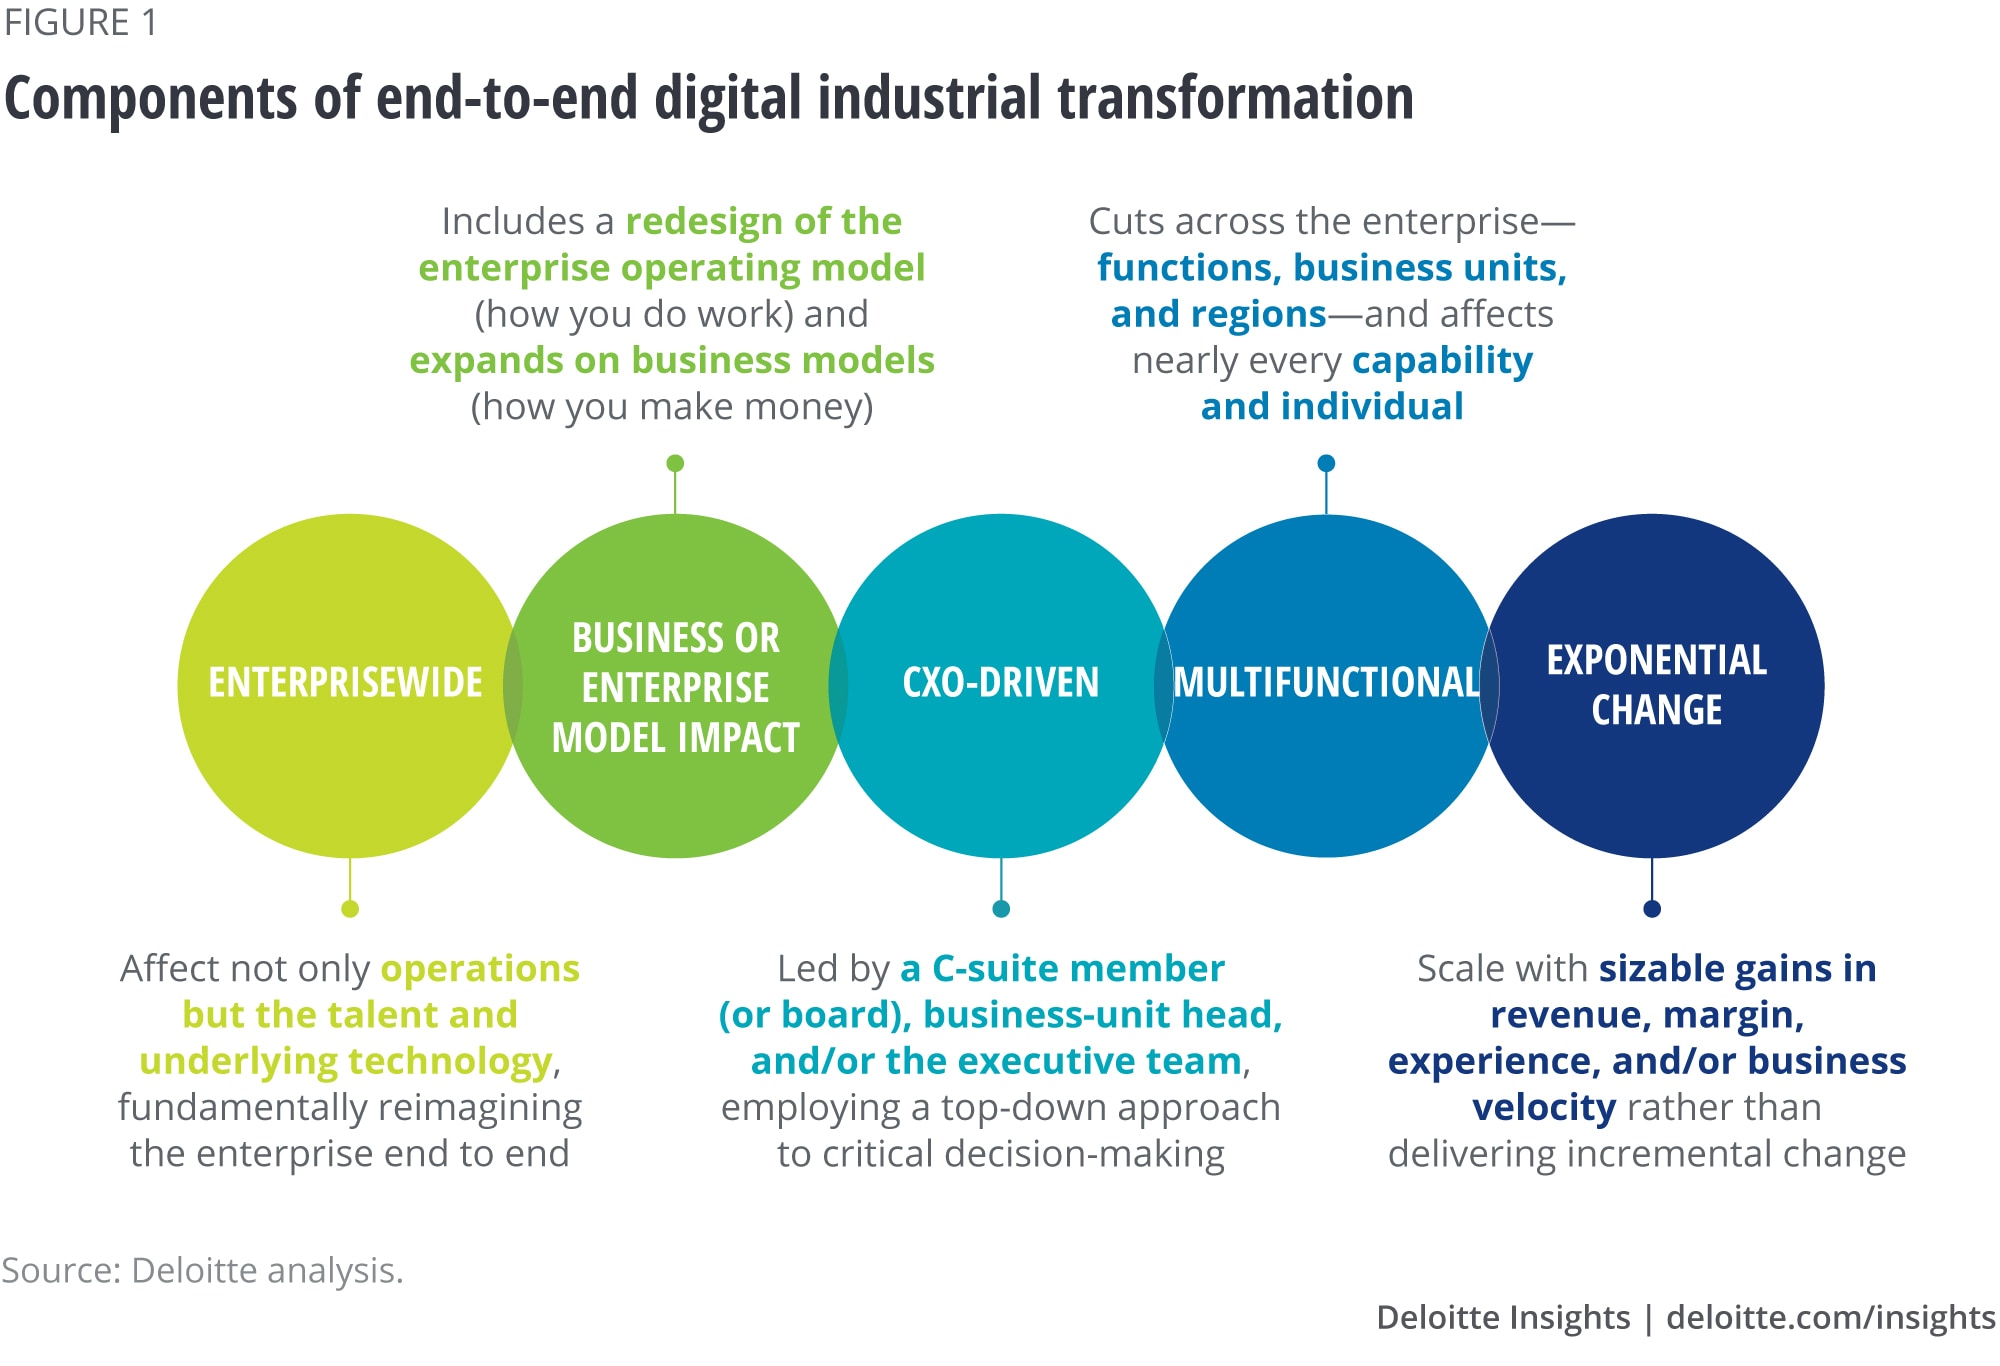 Characteristics of end-to-end digital industrial transformation